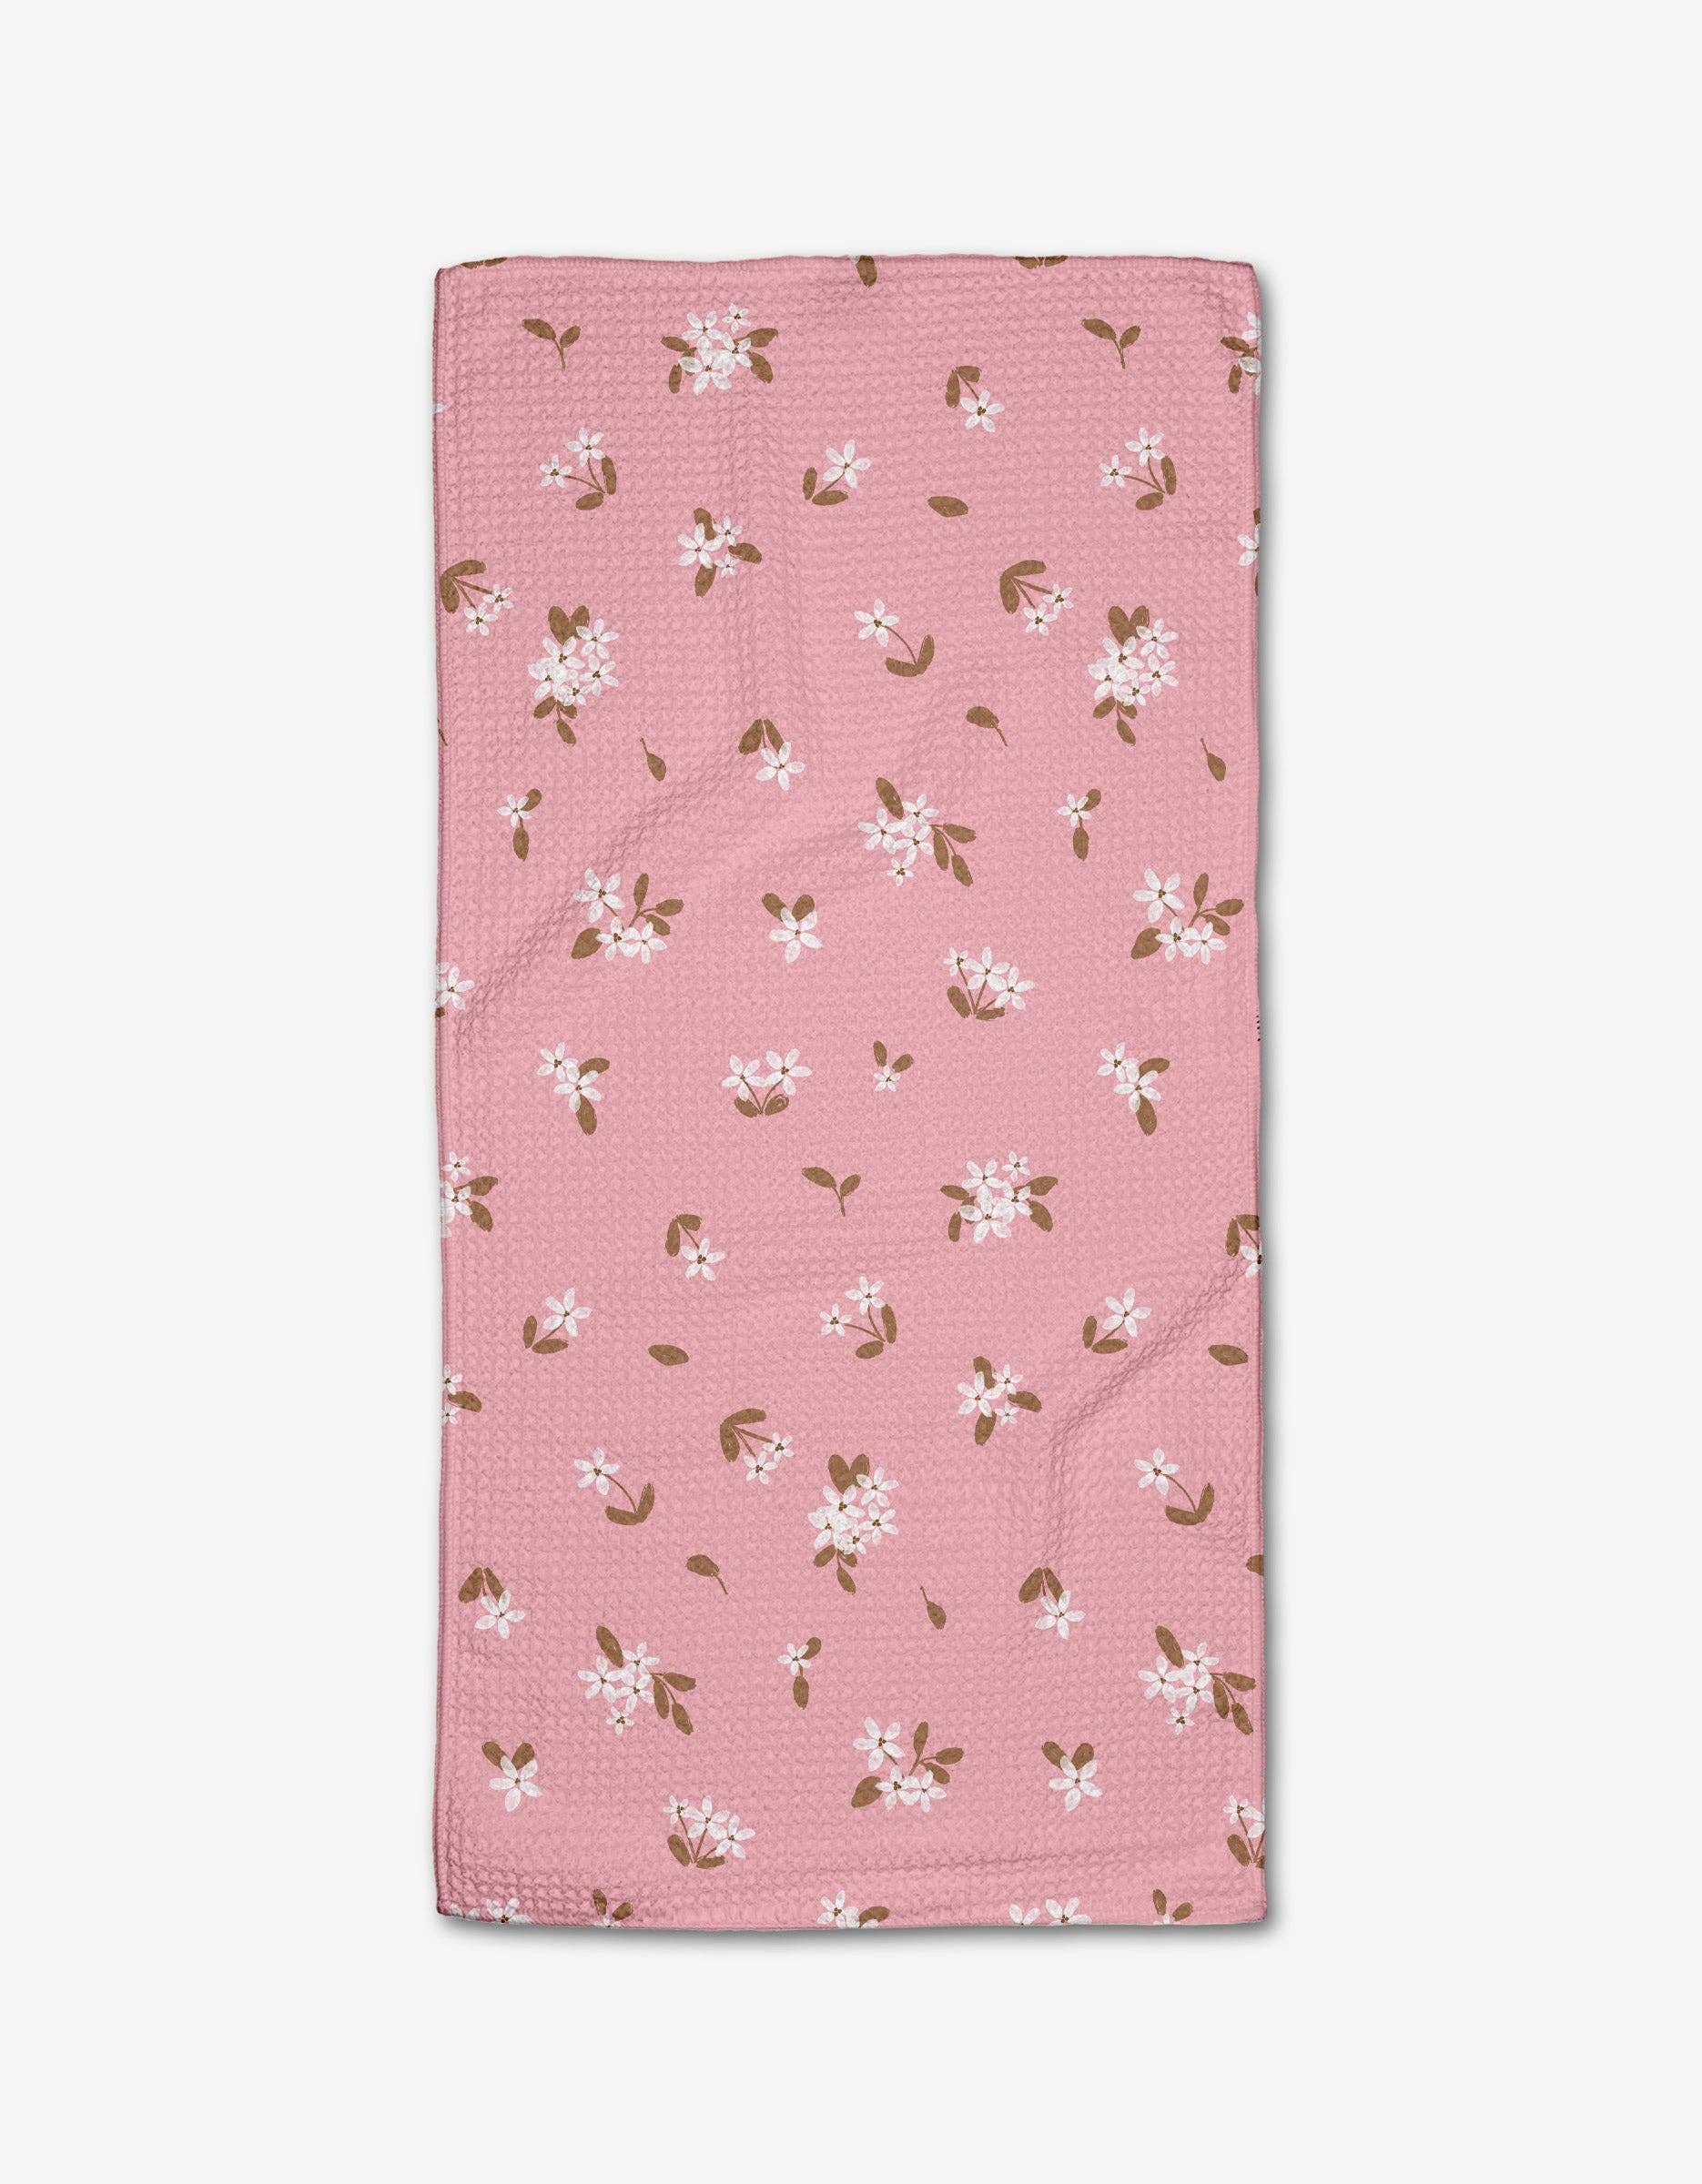 Blossom Breeze in Cotton Candy Bar Towel - The Preppy Bunny